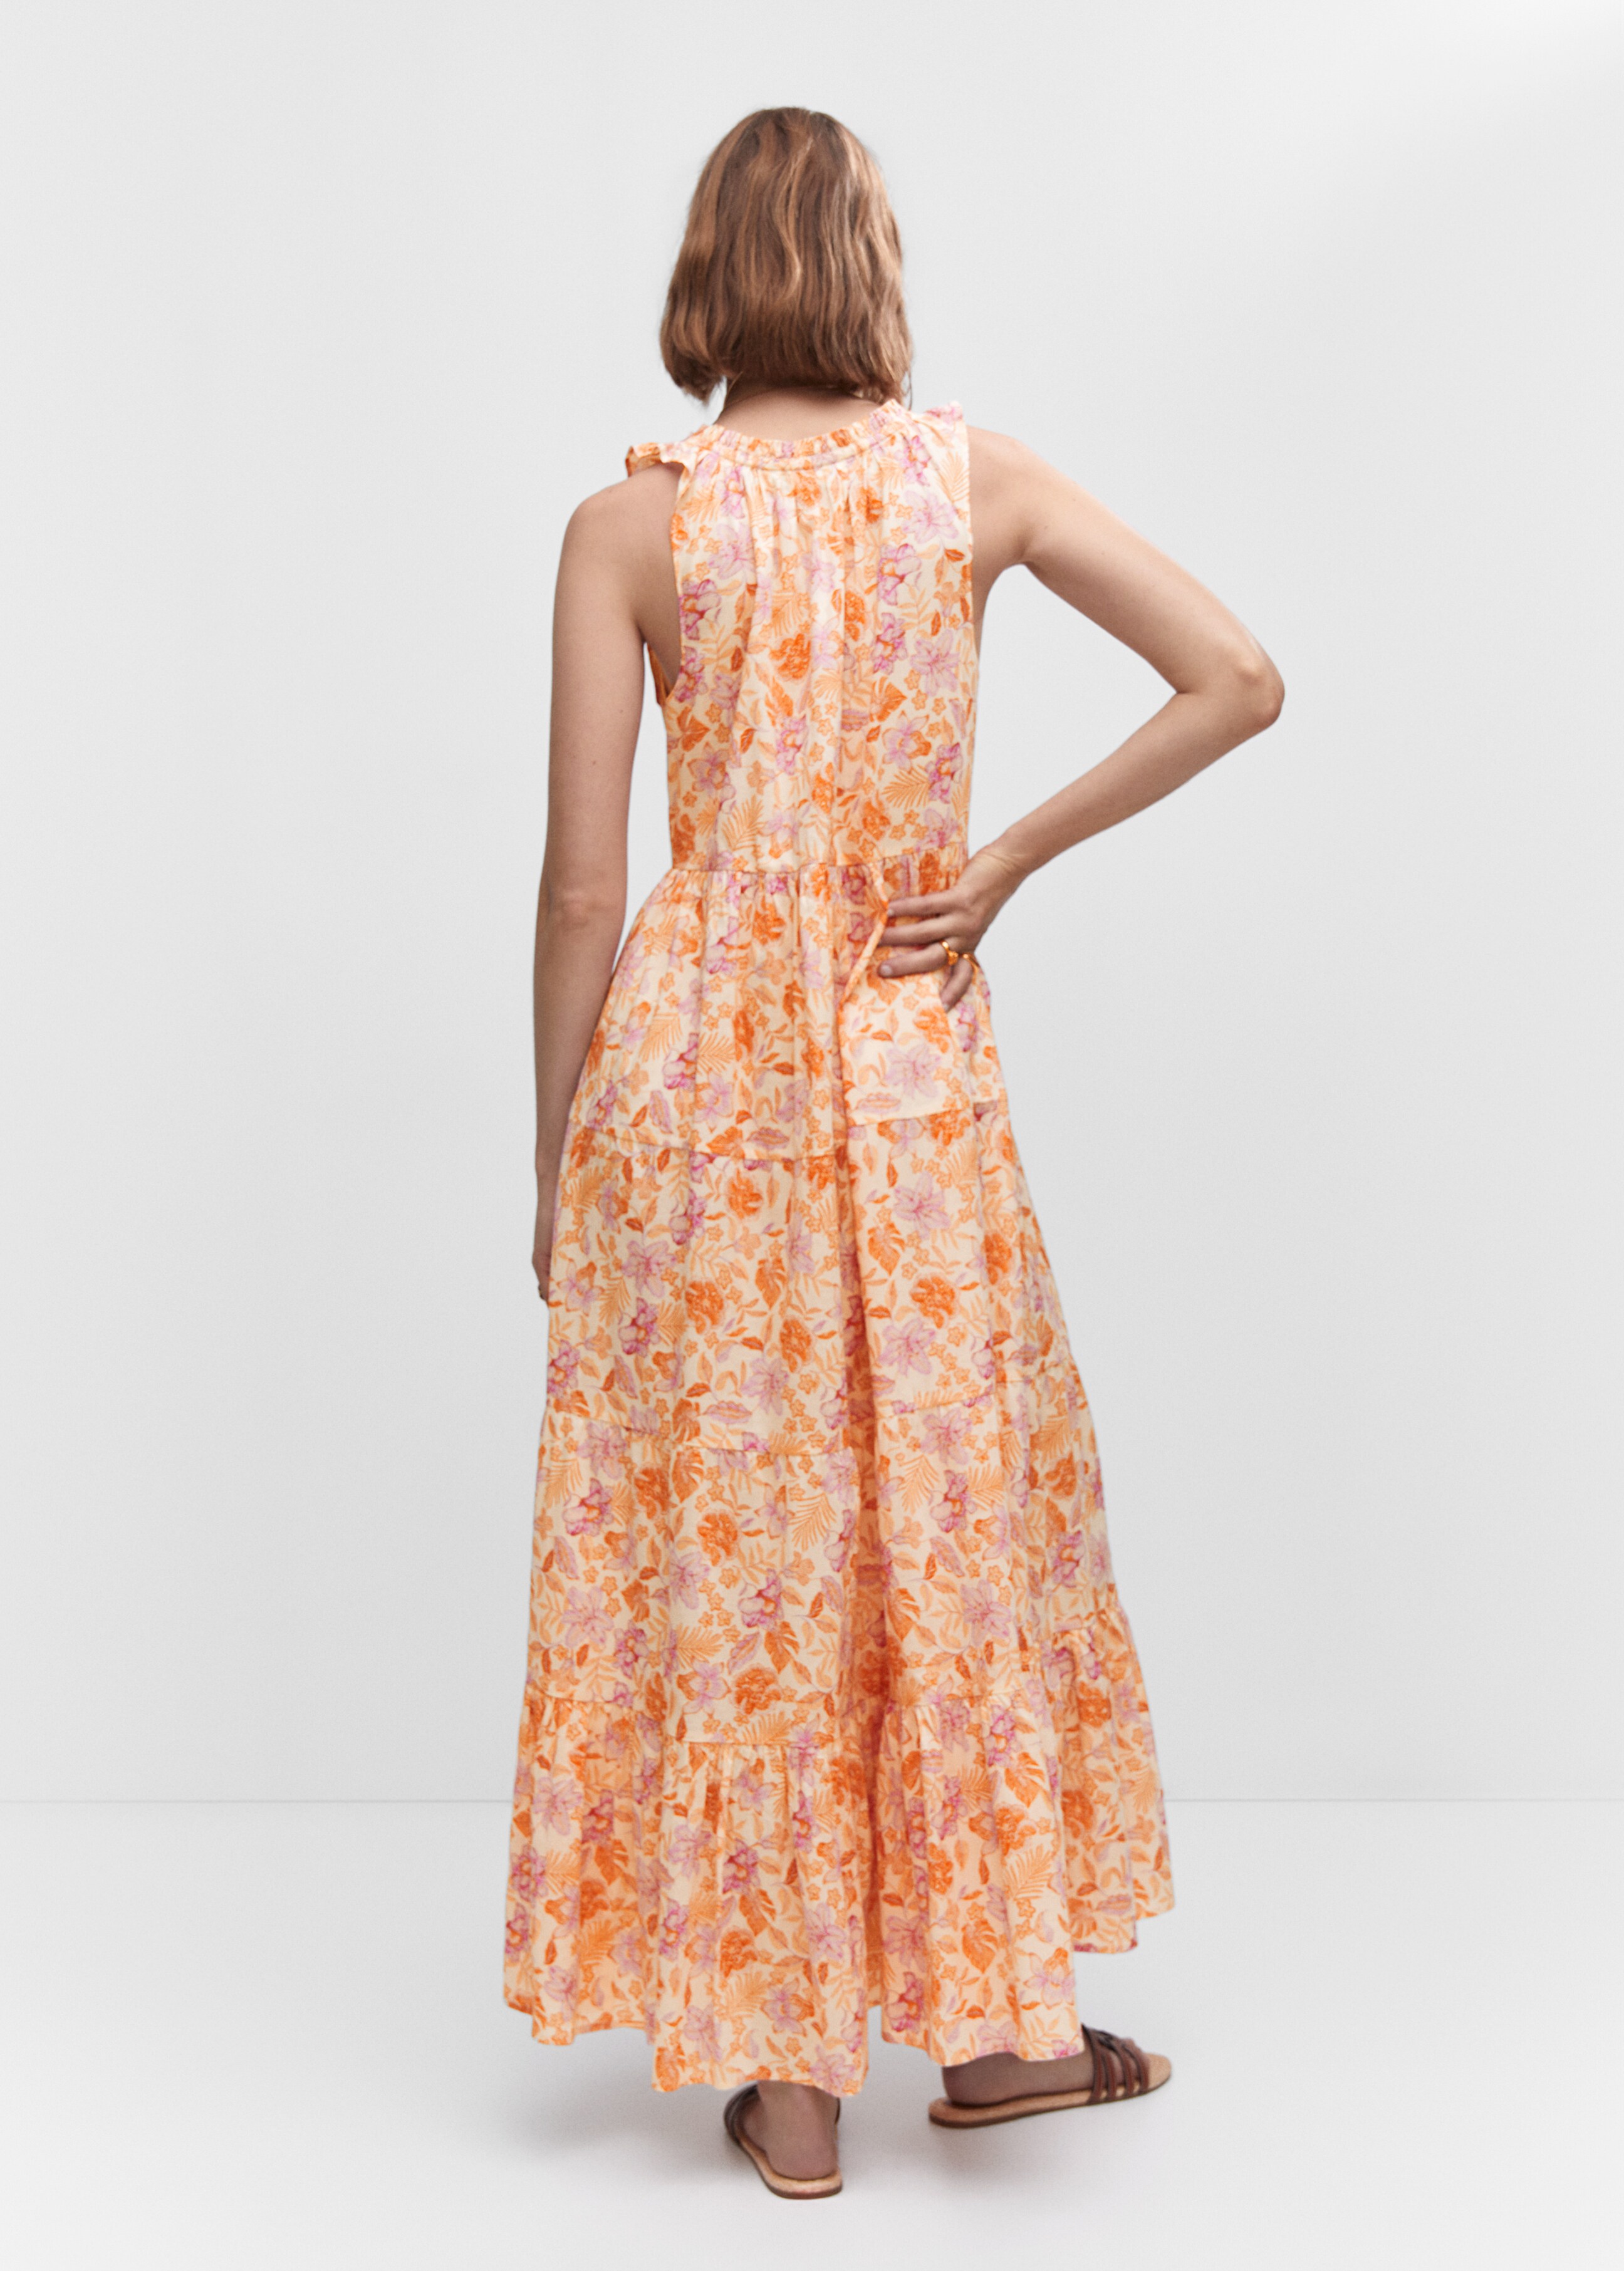 Cord floral dress - Reverse of the article